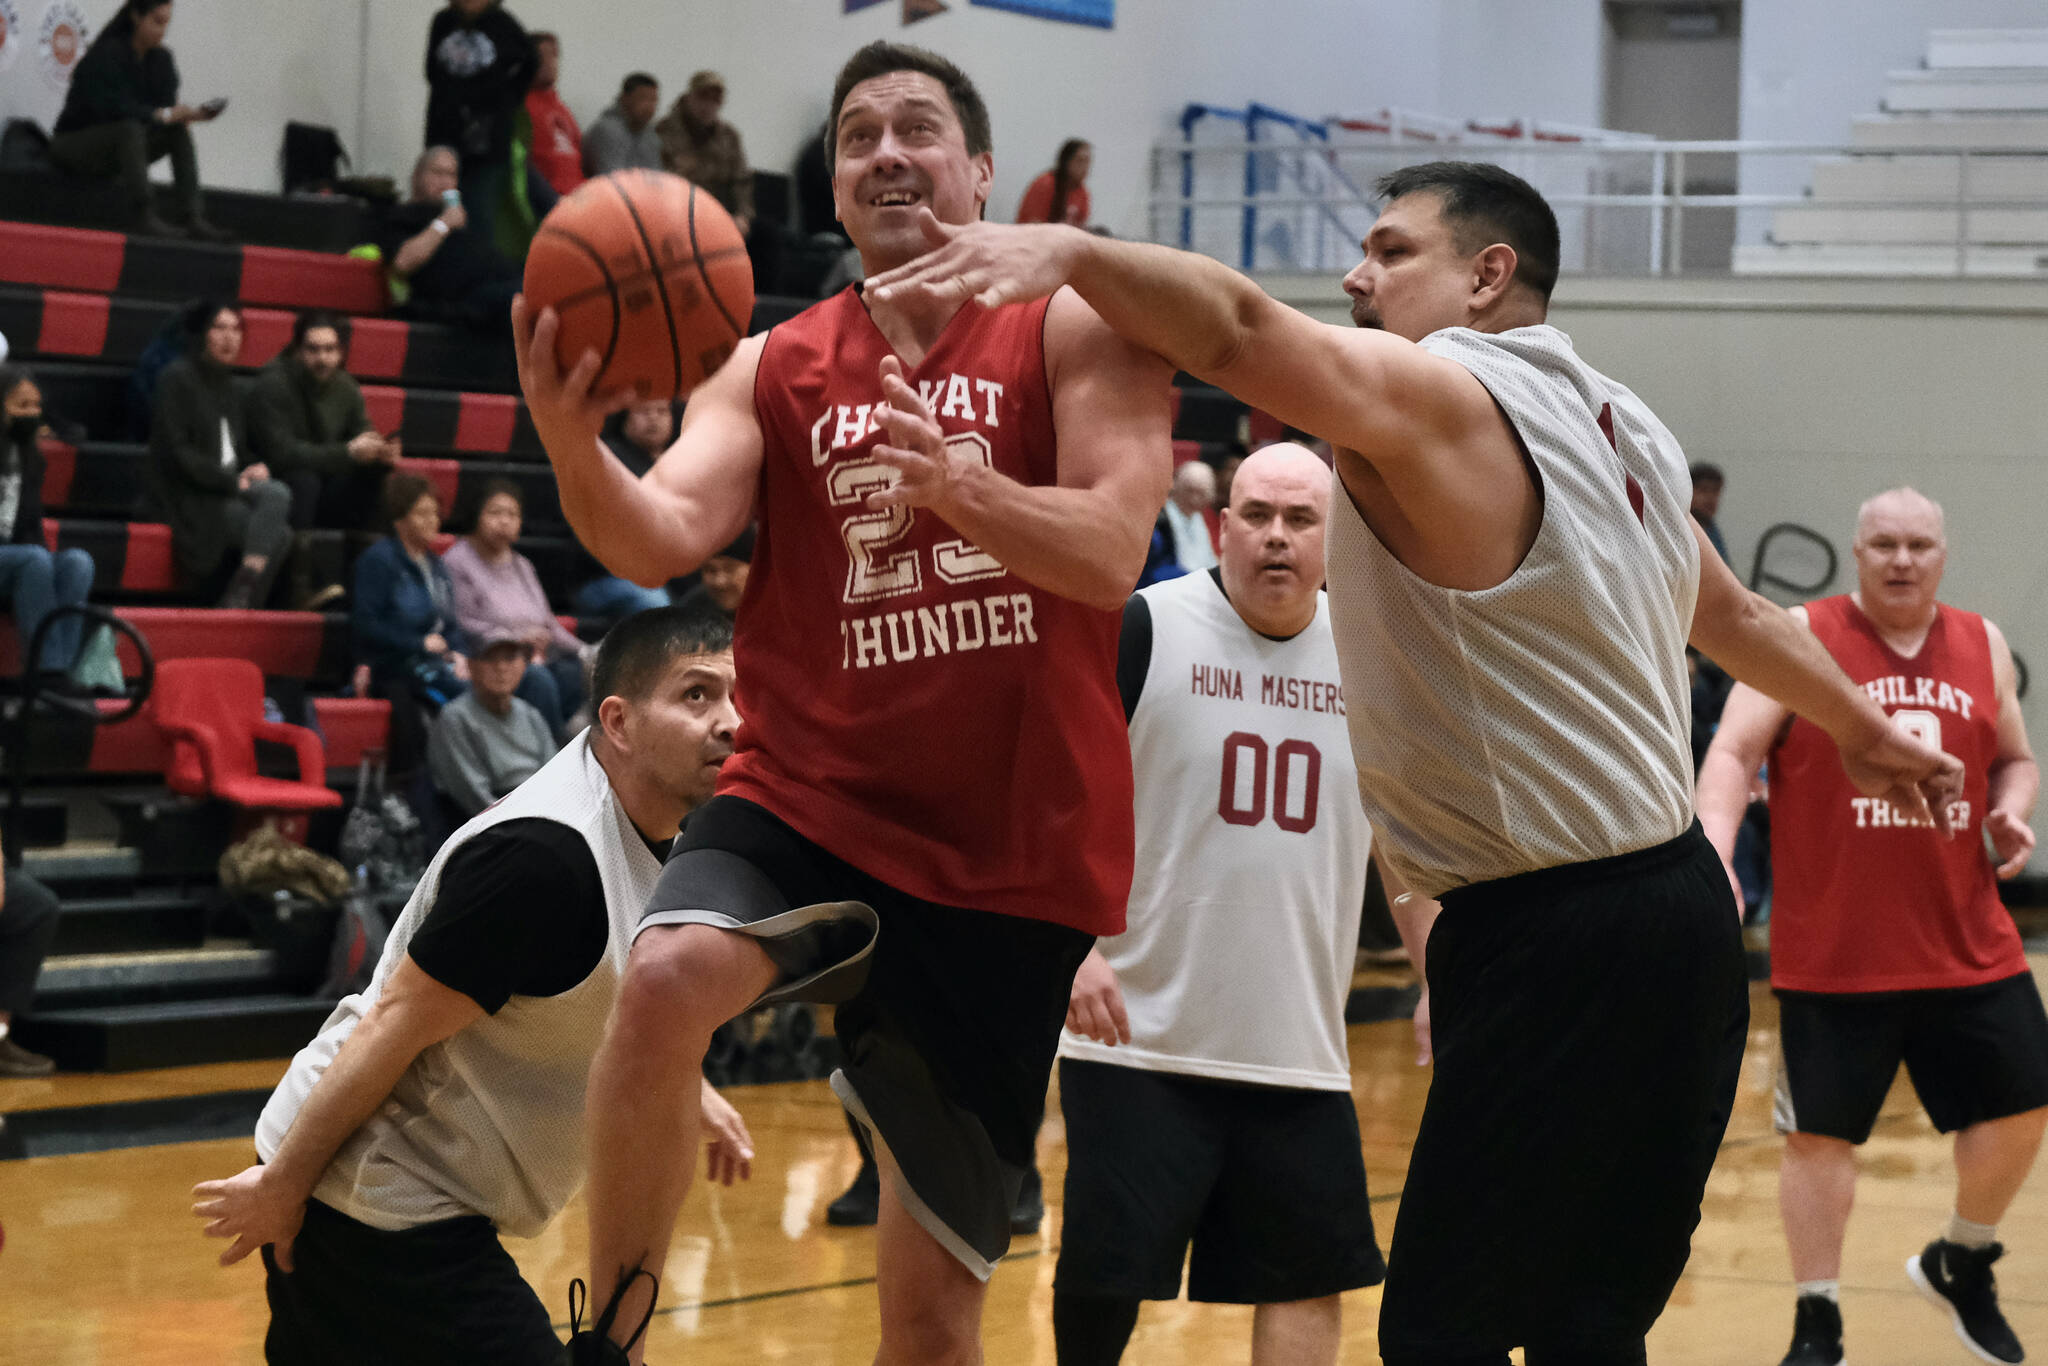 Klukwan’s Russ Stevens (23) scores against Hoonah’s Michael Mills (1) during Masters Bracket action in the Gold Medal Basketball Tournament, Monday, March 20, at Juneau-Douglas High School: Yadaa.at Kalé. (Klas Stolpe/For the Juneau Empire)